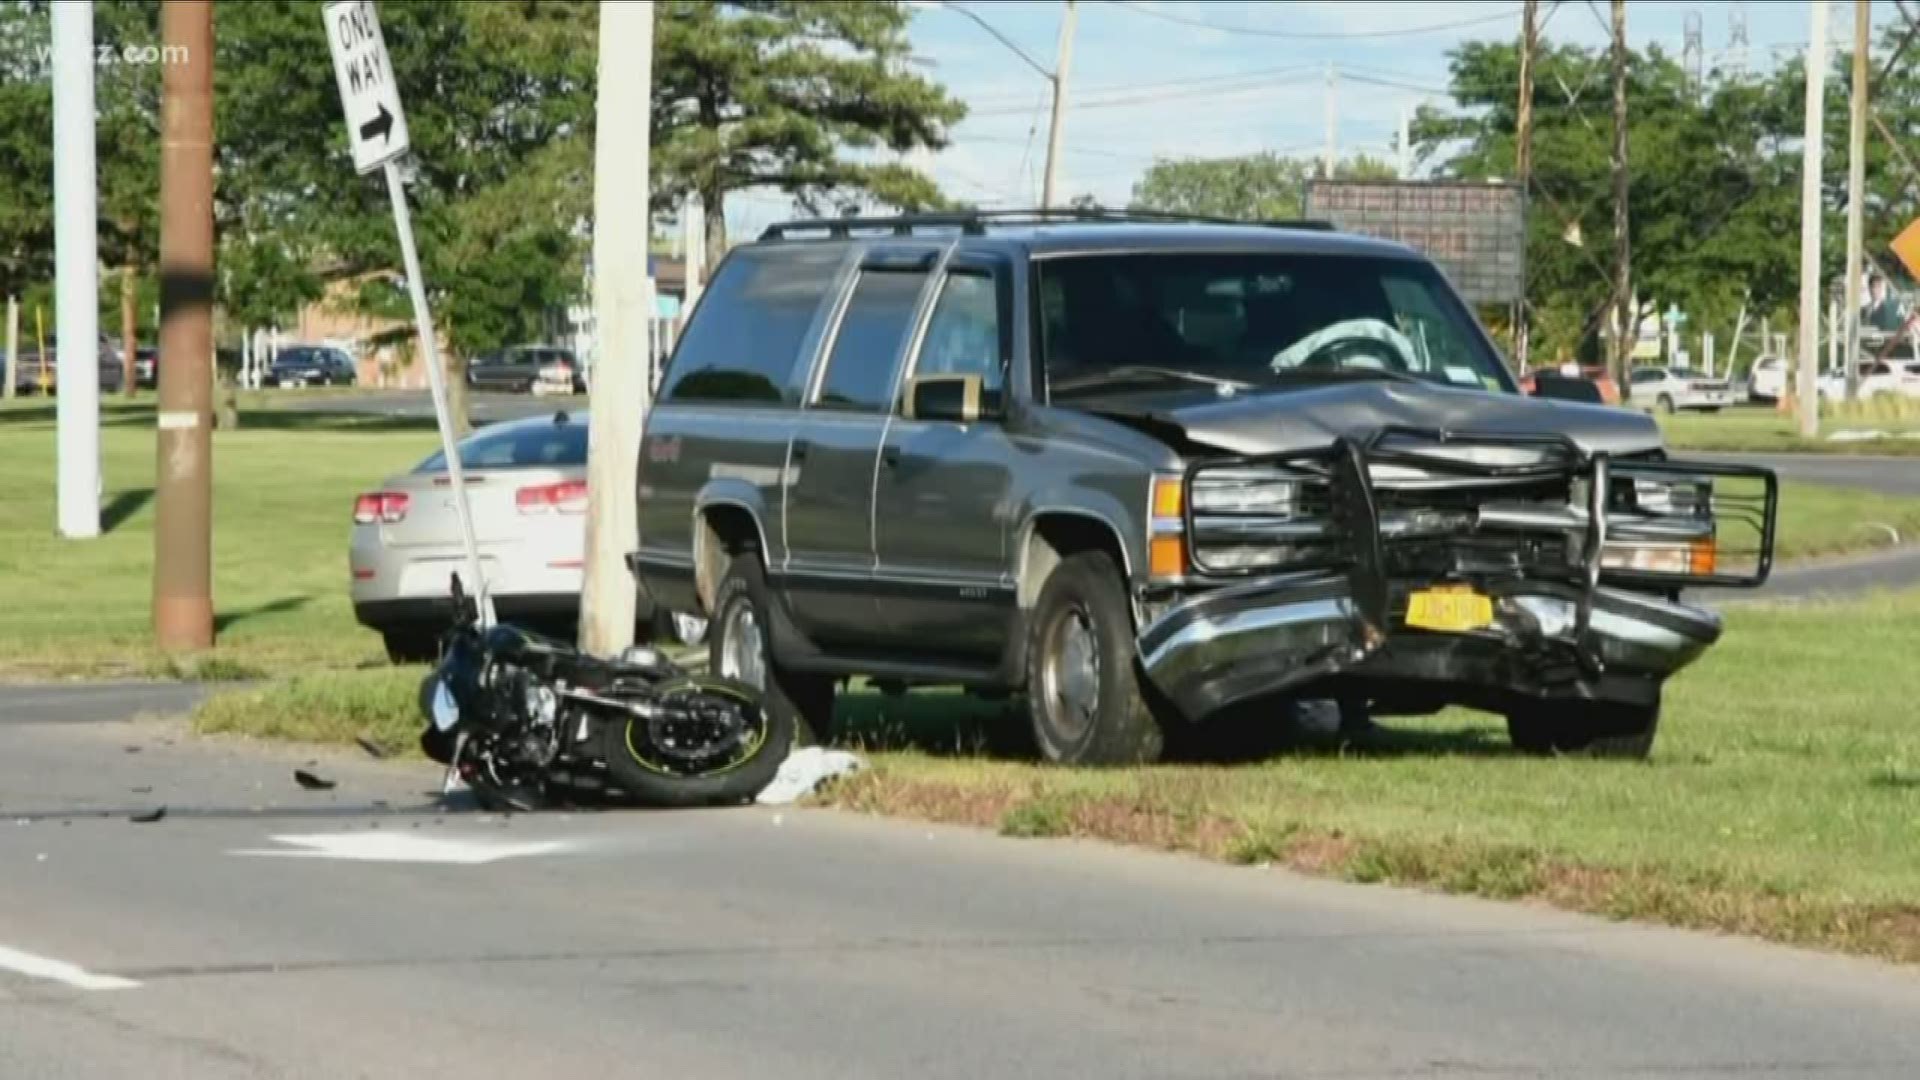 Police now identify the victim as a 23 year old a man from North Tonawanda who was thrown from his bike at the intersection of Pine and Walnut Avenues after it was hit by an SUV.